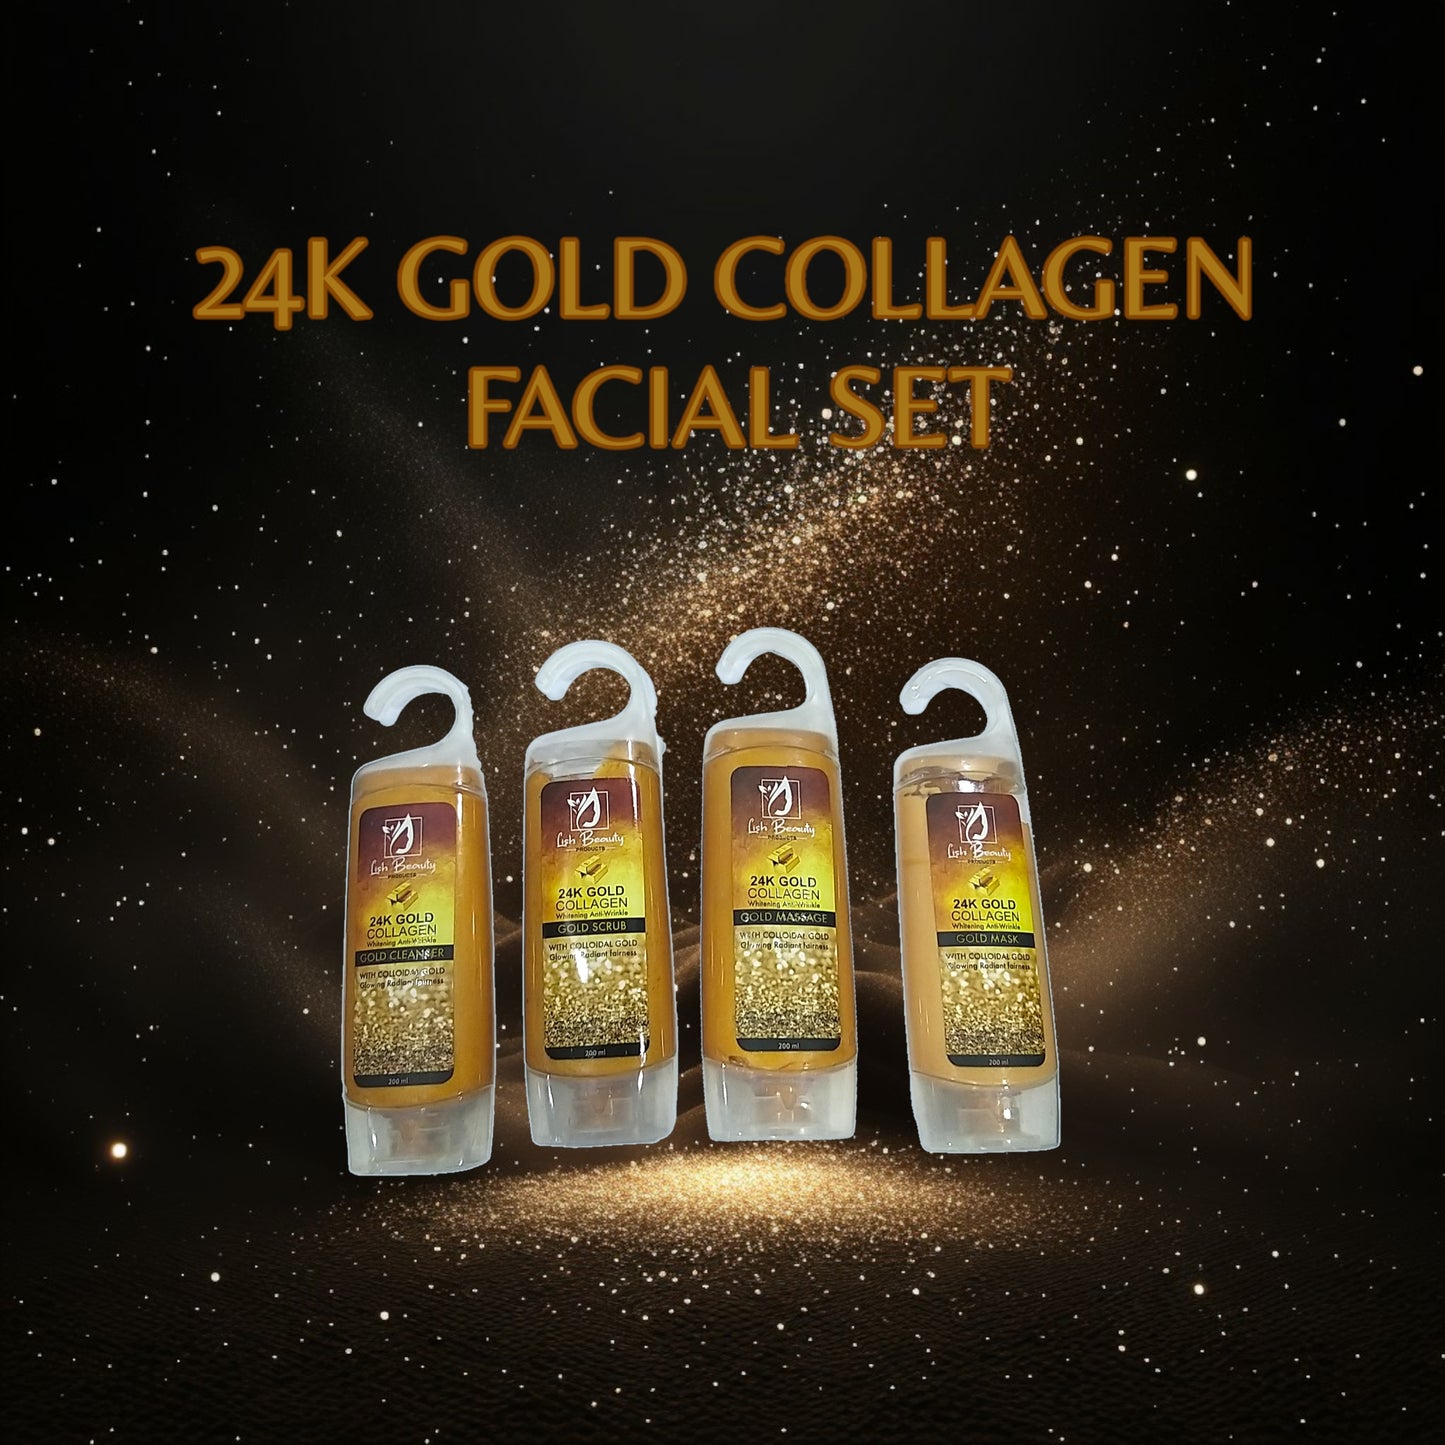 24K Gold Collagen Whitening Anti-Wrinkle With Colloidal Gold Glowing Radiant Fairness Facial Set